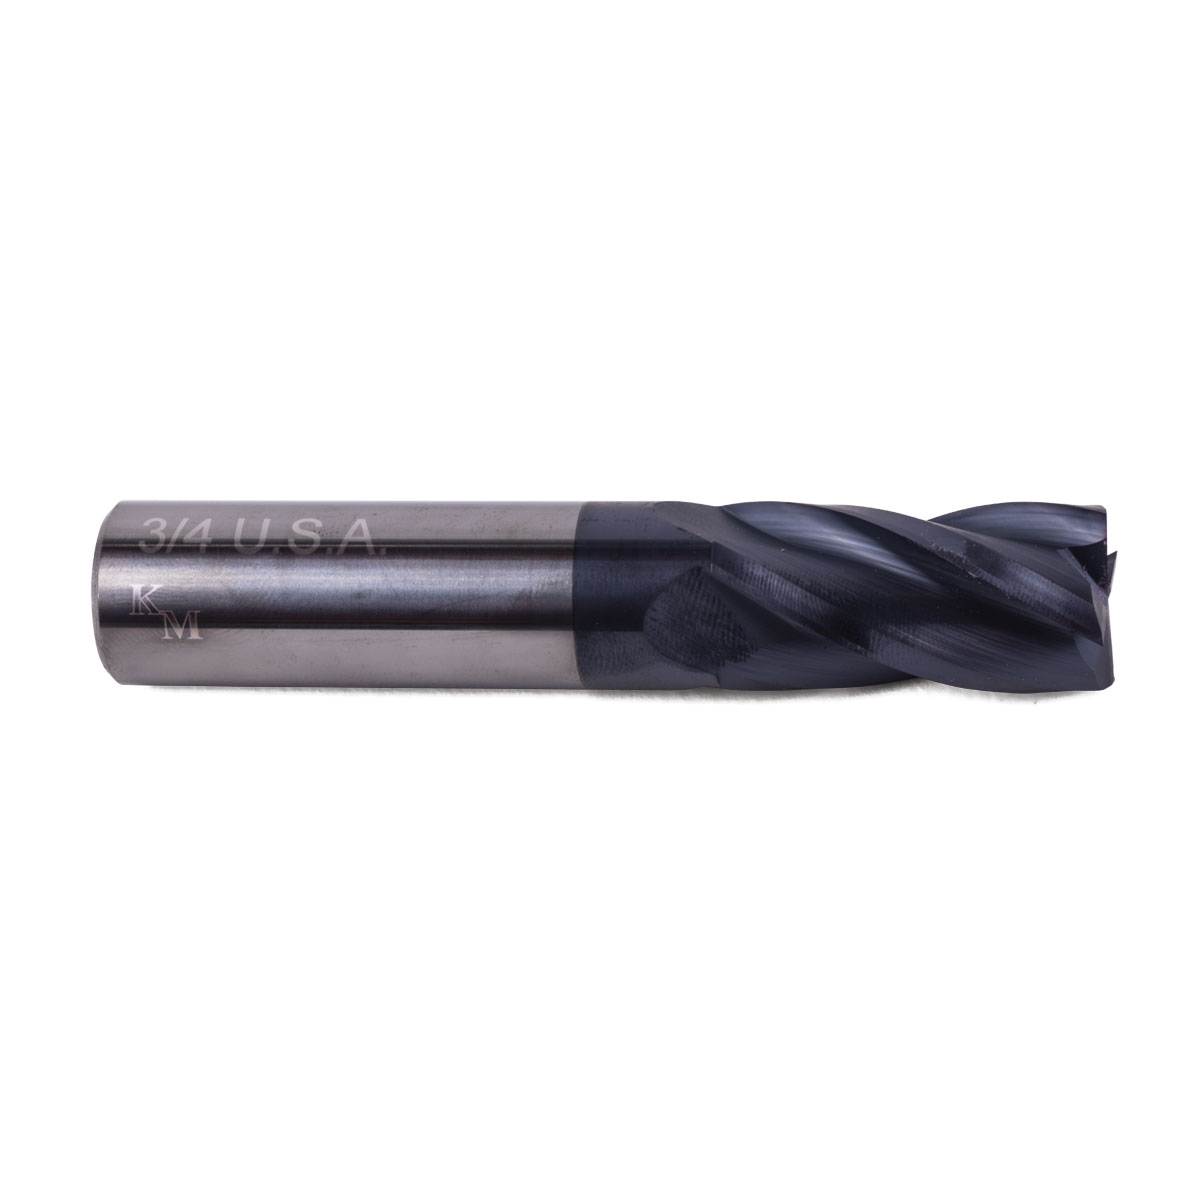 1/4 AlTiN Coated End Mill